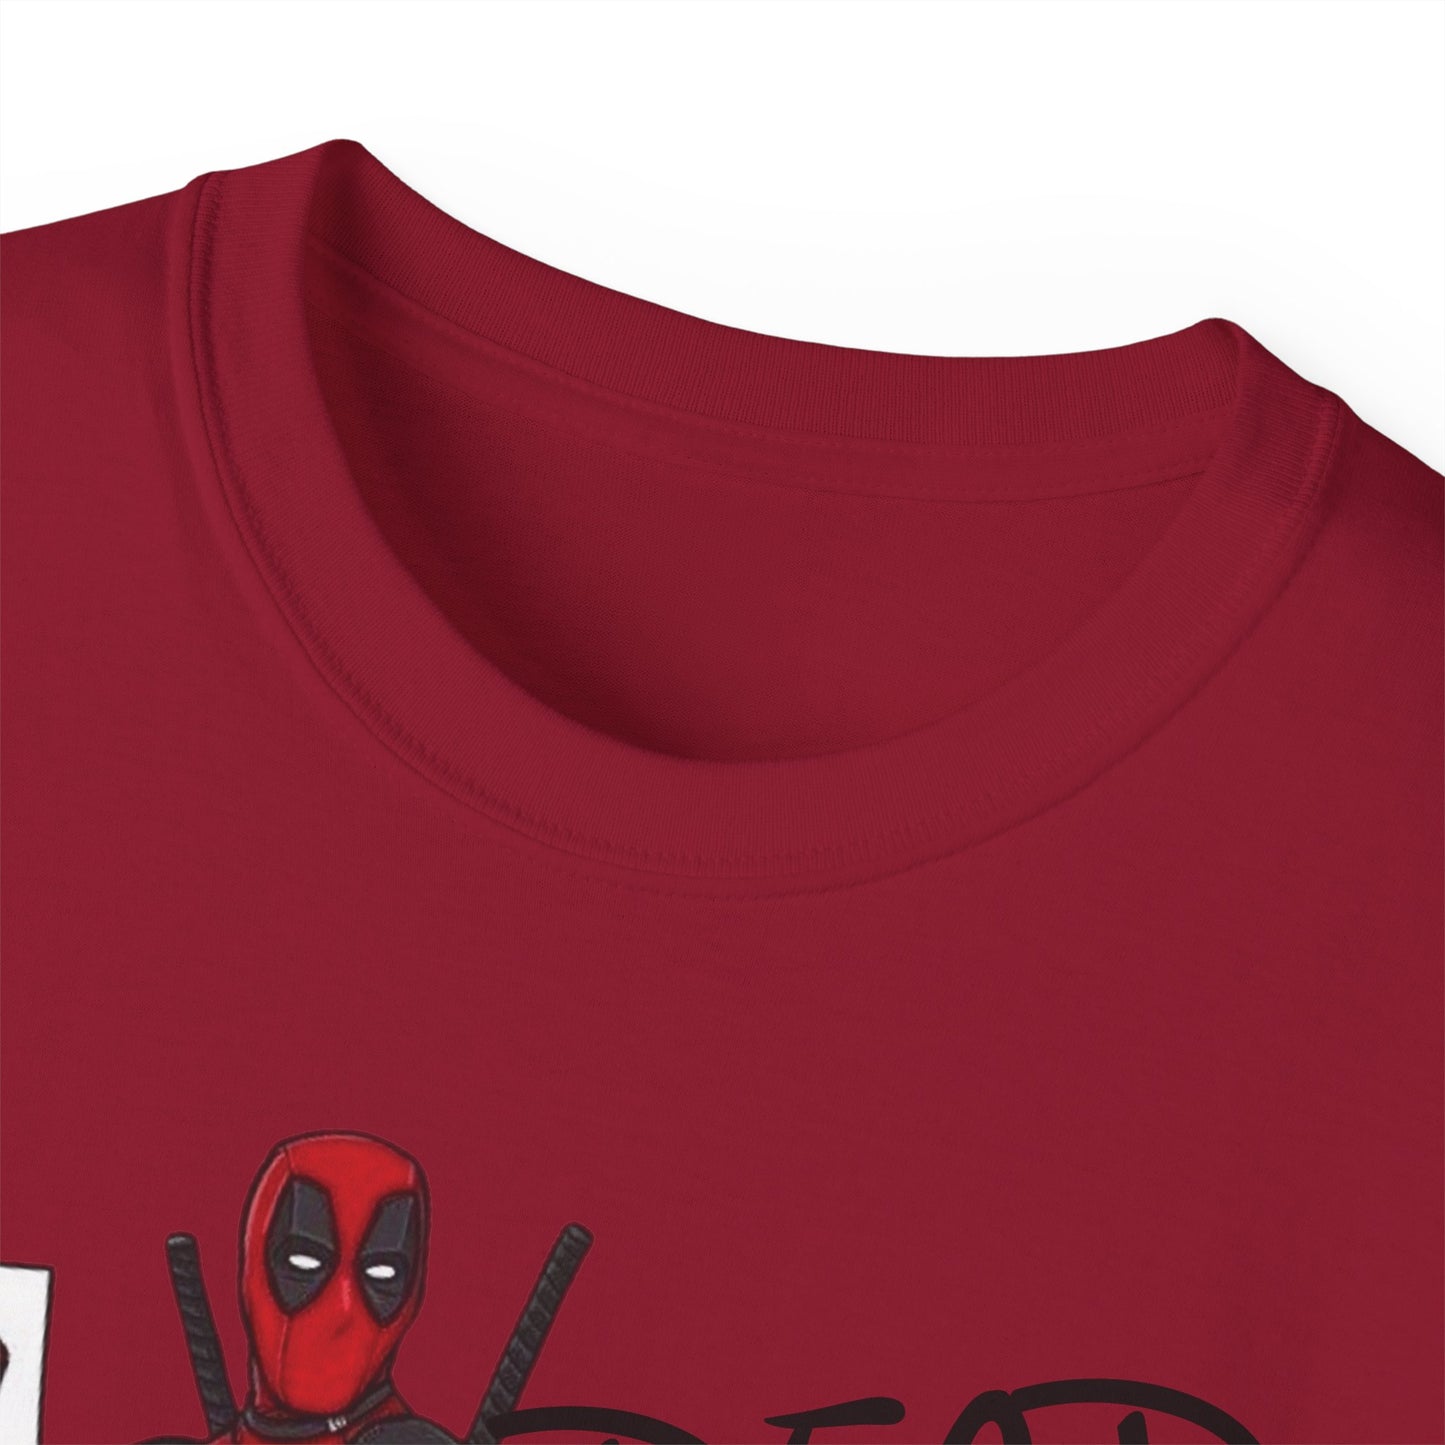 Deadpool Workout Deadlifting Red Comfort Fit Plus Size Gym Shirt Funny Fitness Apparel